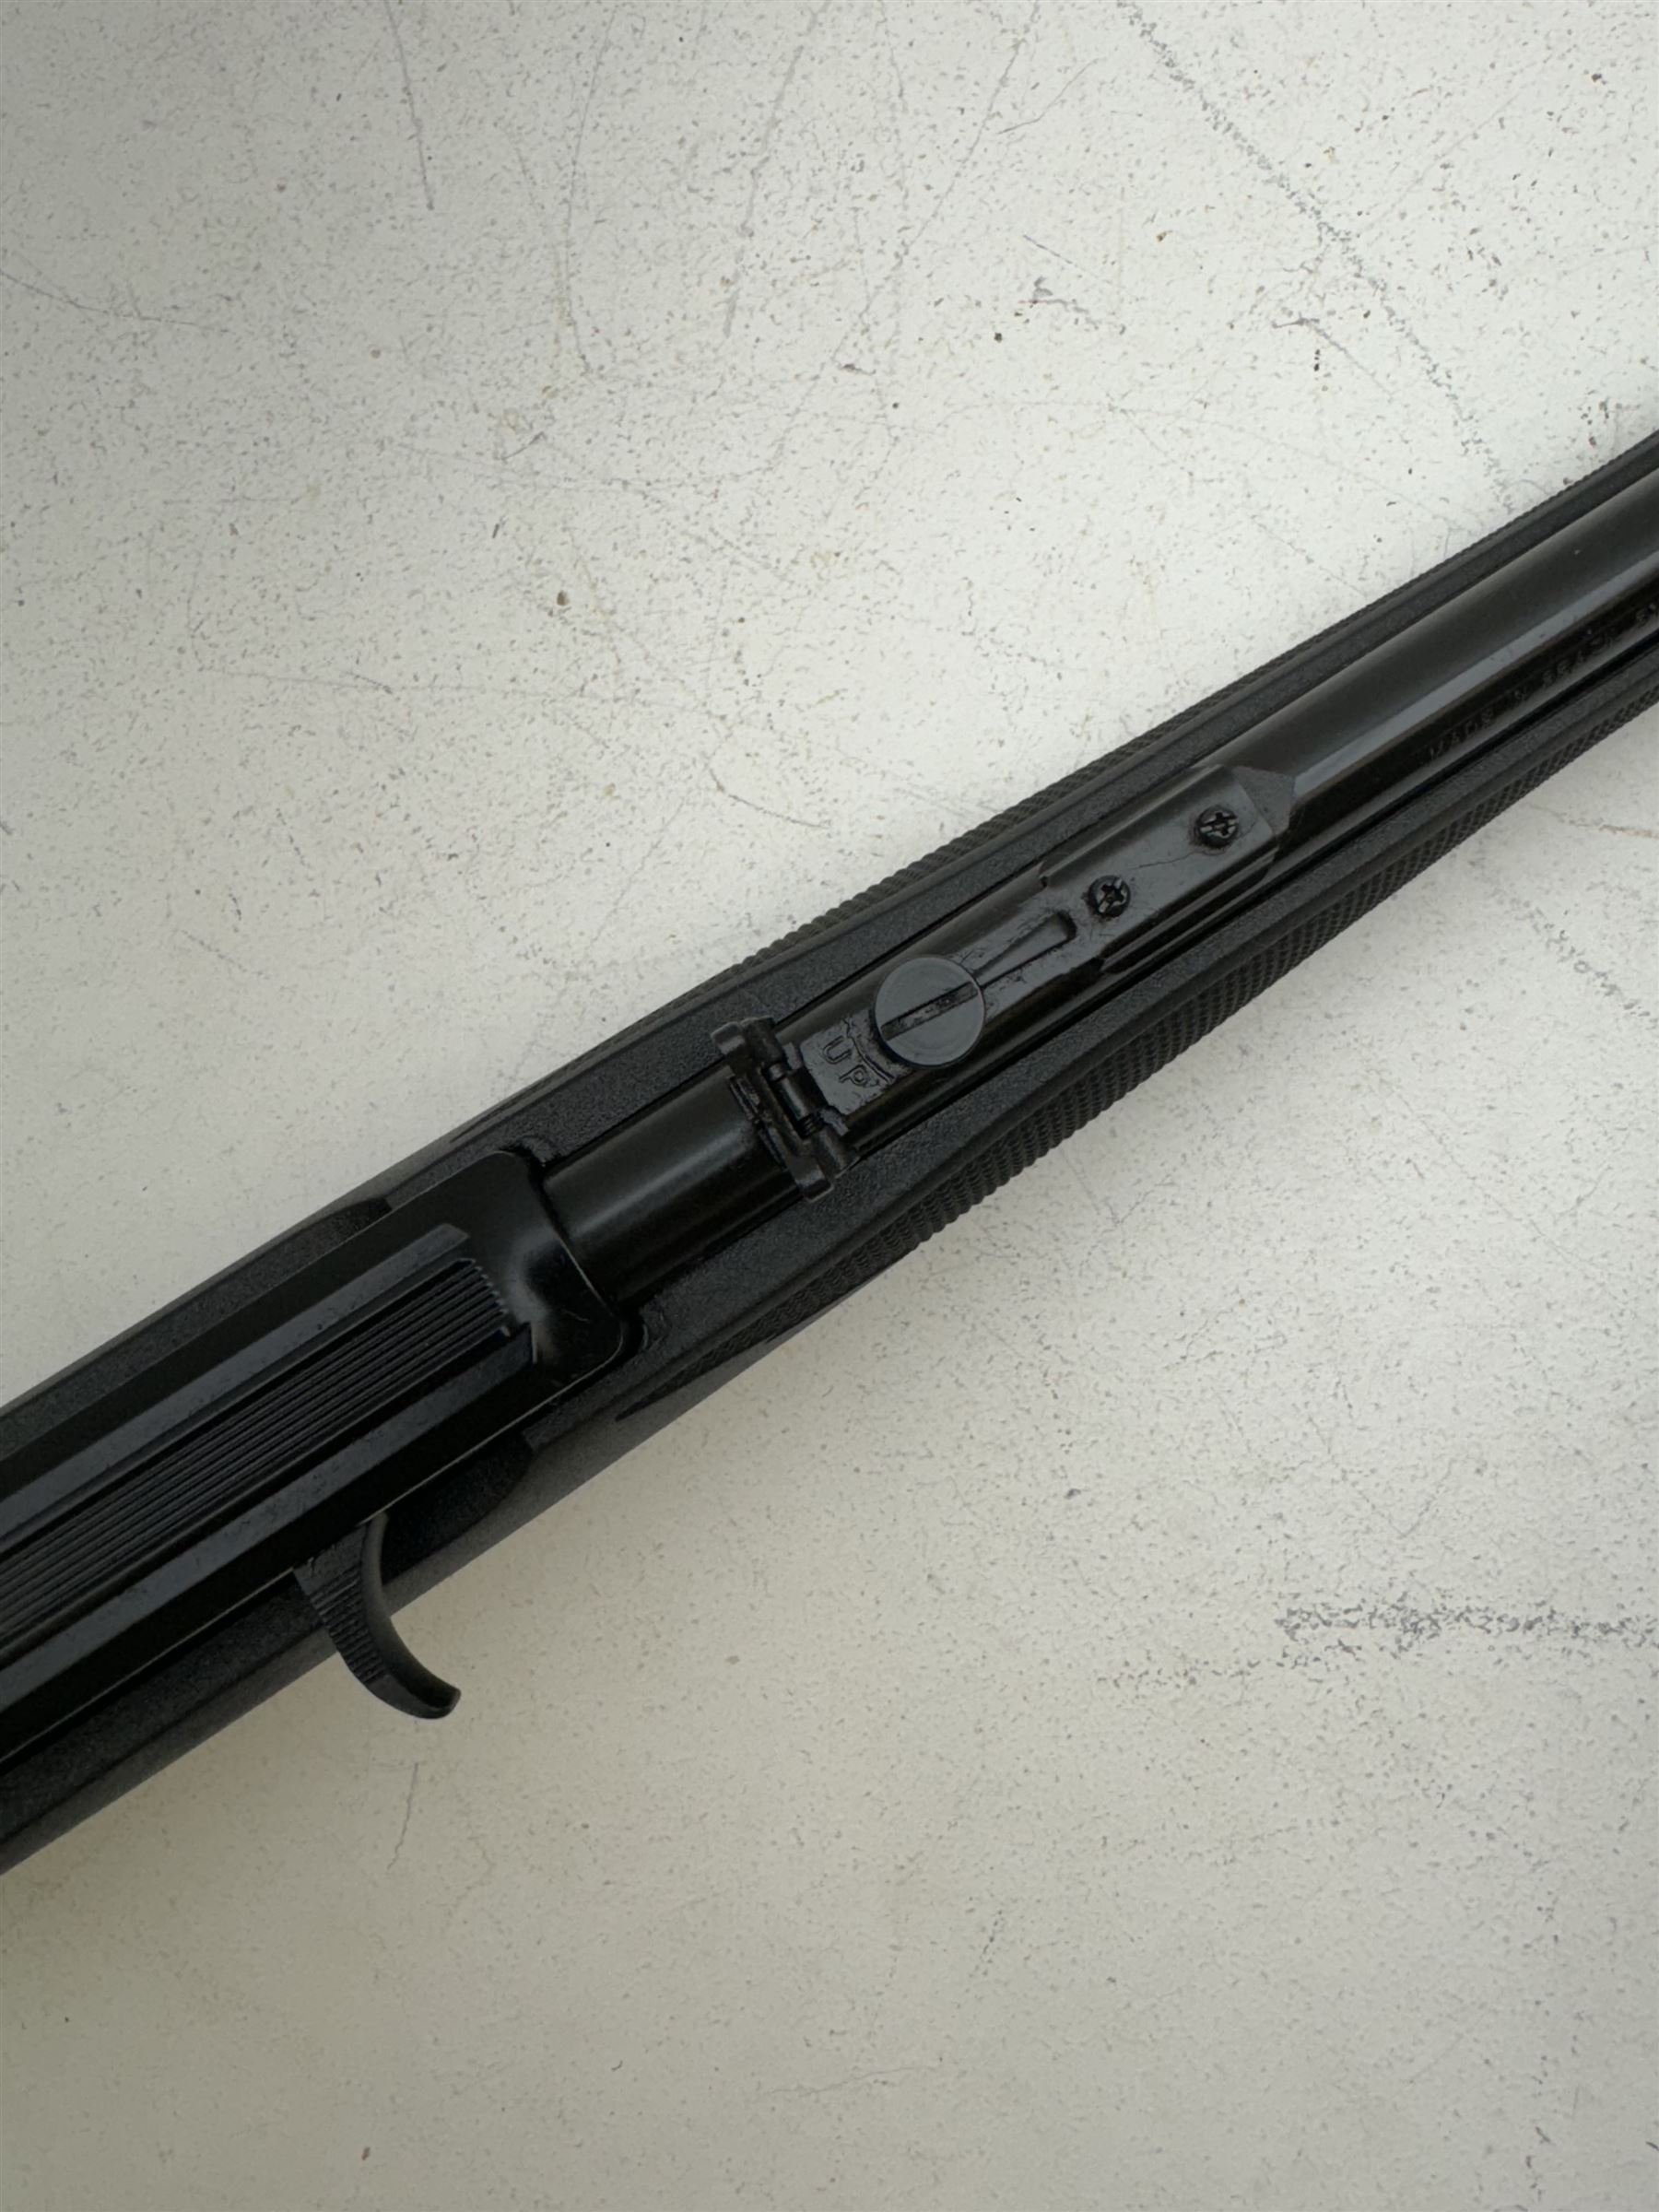 SECTION 1 FIREARMS CERTIFICATE REQUIRED - New Magtech MOD 7022 semi-auto .22 rifle 61cm (18") barrel - Image 4 of 15